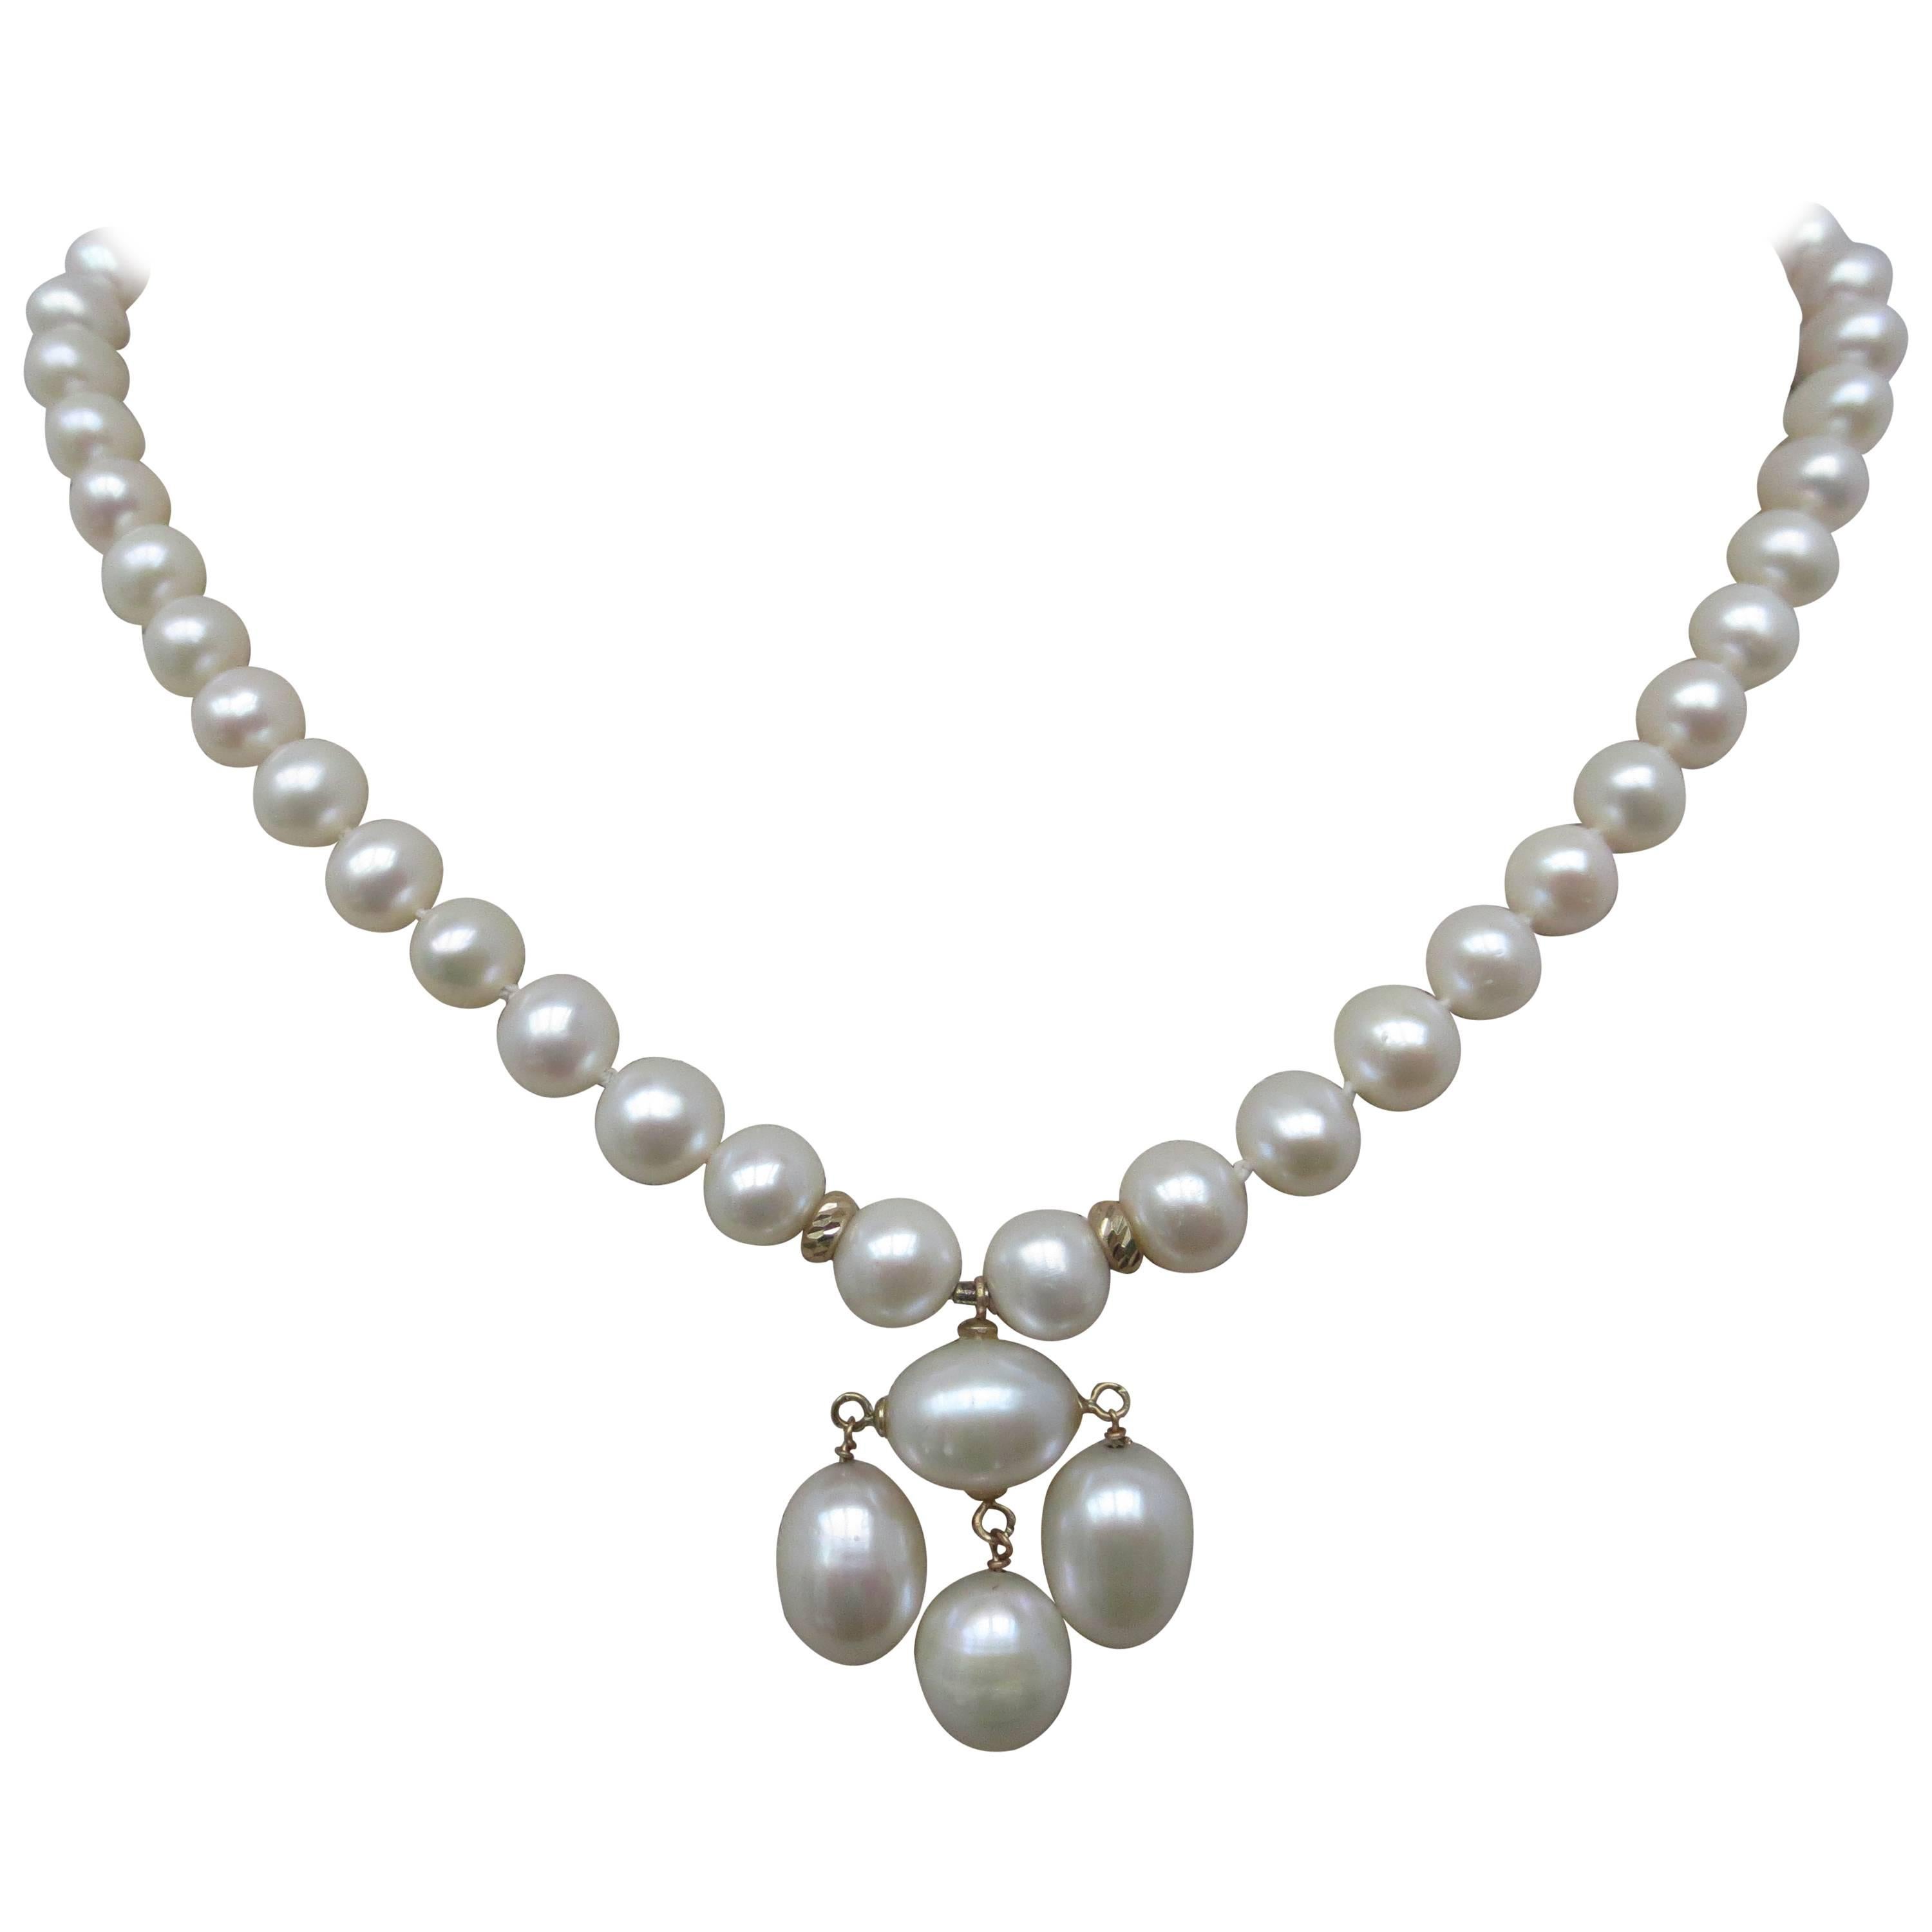 Marina J Pearl Necklace with Baroque Pearl Centerpiece & 14k Gold Clasp For Sale